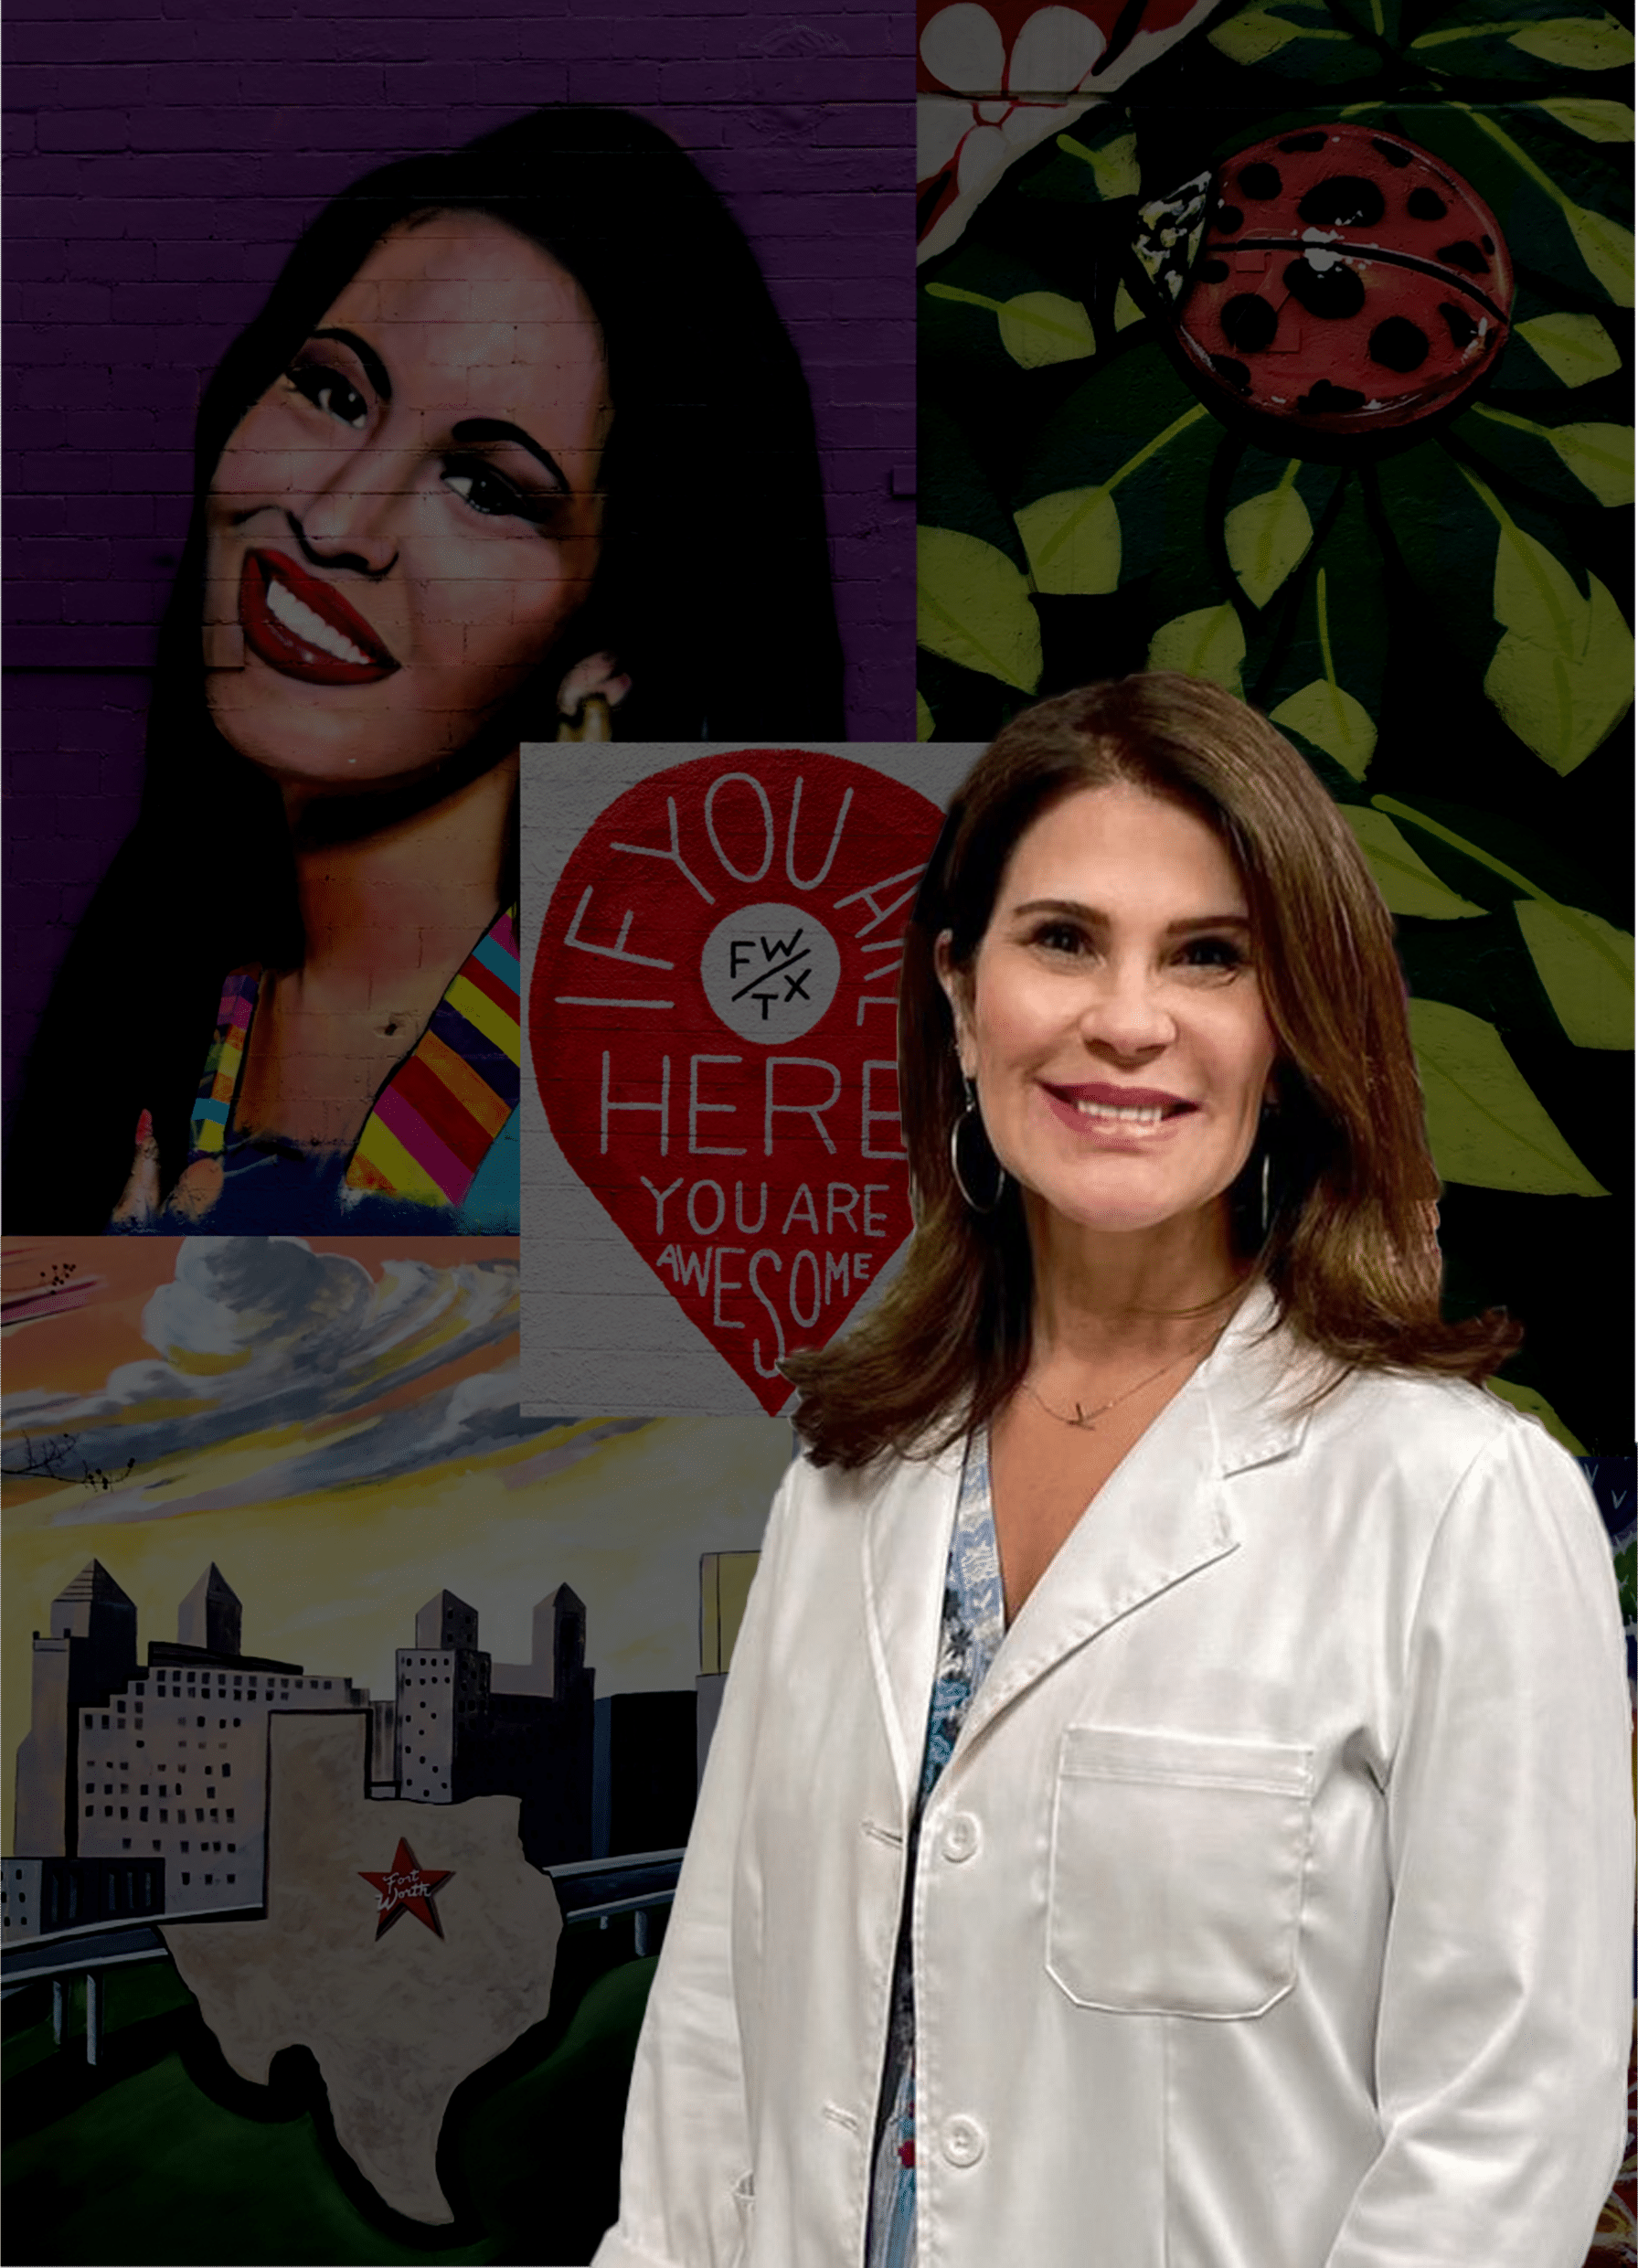 Krista by a mural collage in the Fort Worth plastic surgery office of Dr. Kelly Kunkel.